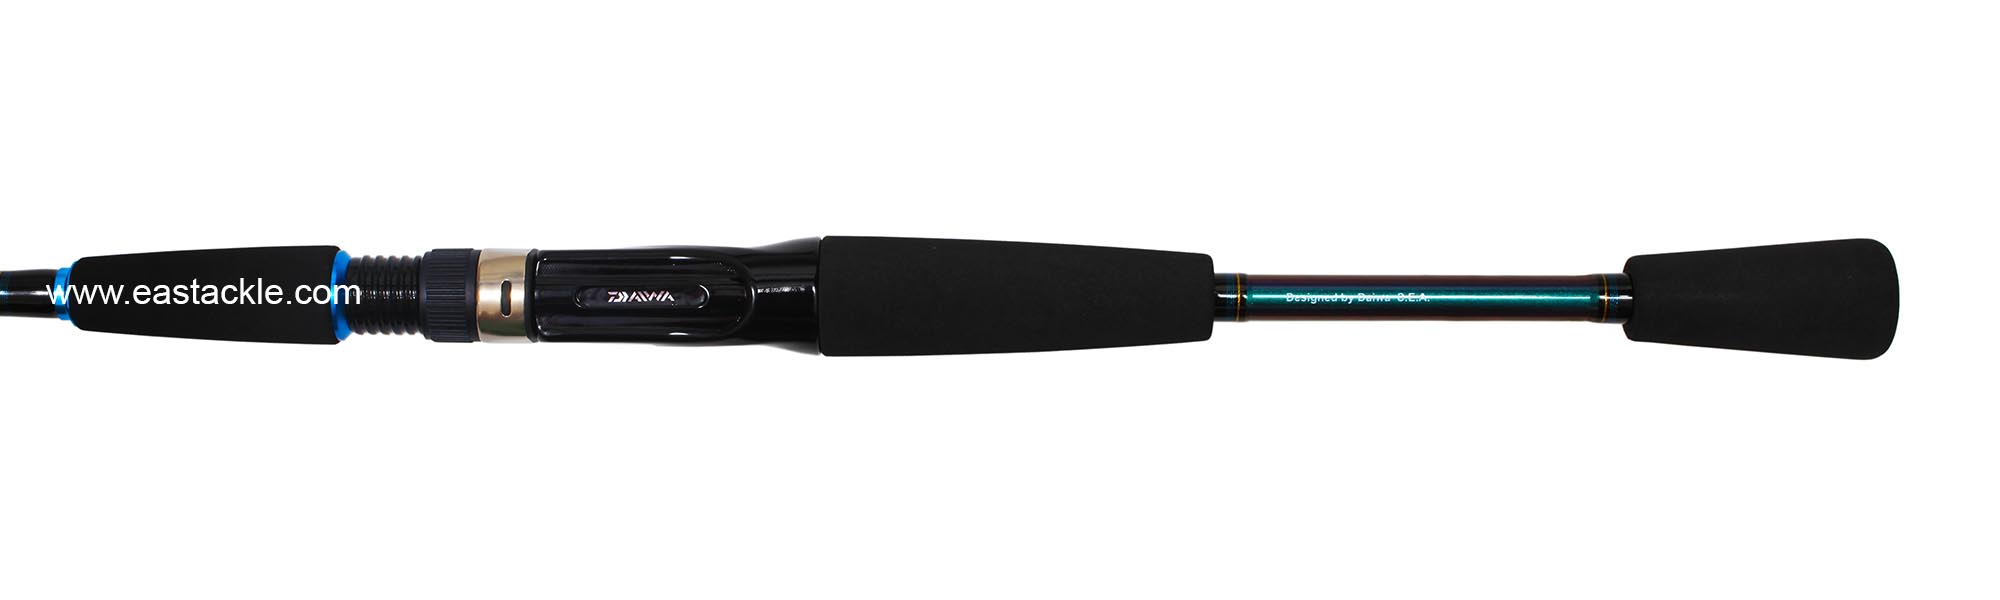 Daiwa - Harrier  - 602MB-SD - Bait Casting Rod - Handle Section (Top View) | Eastackle